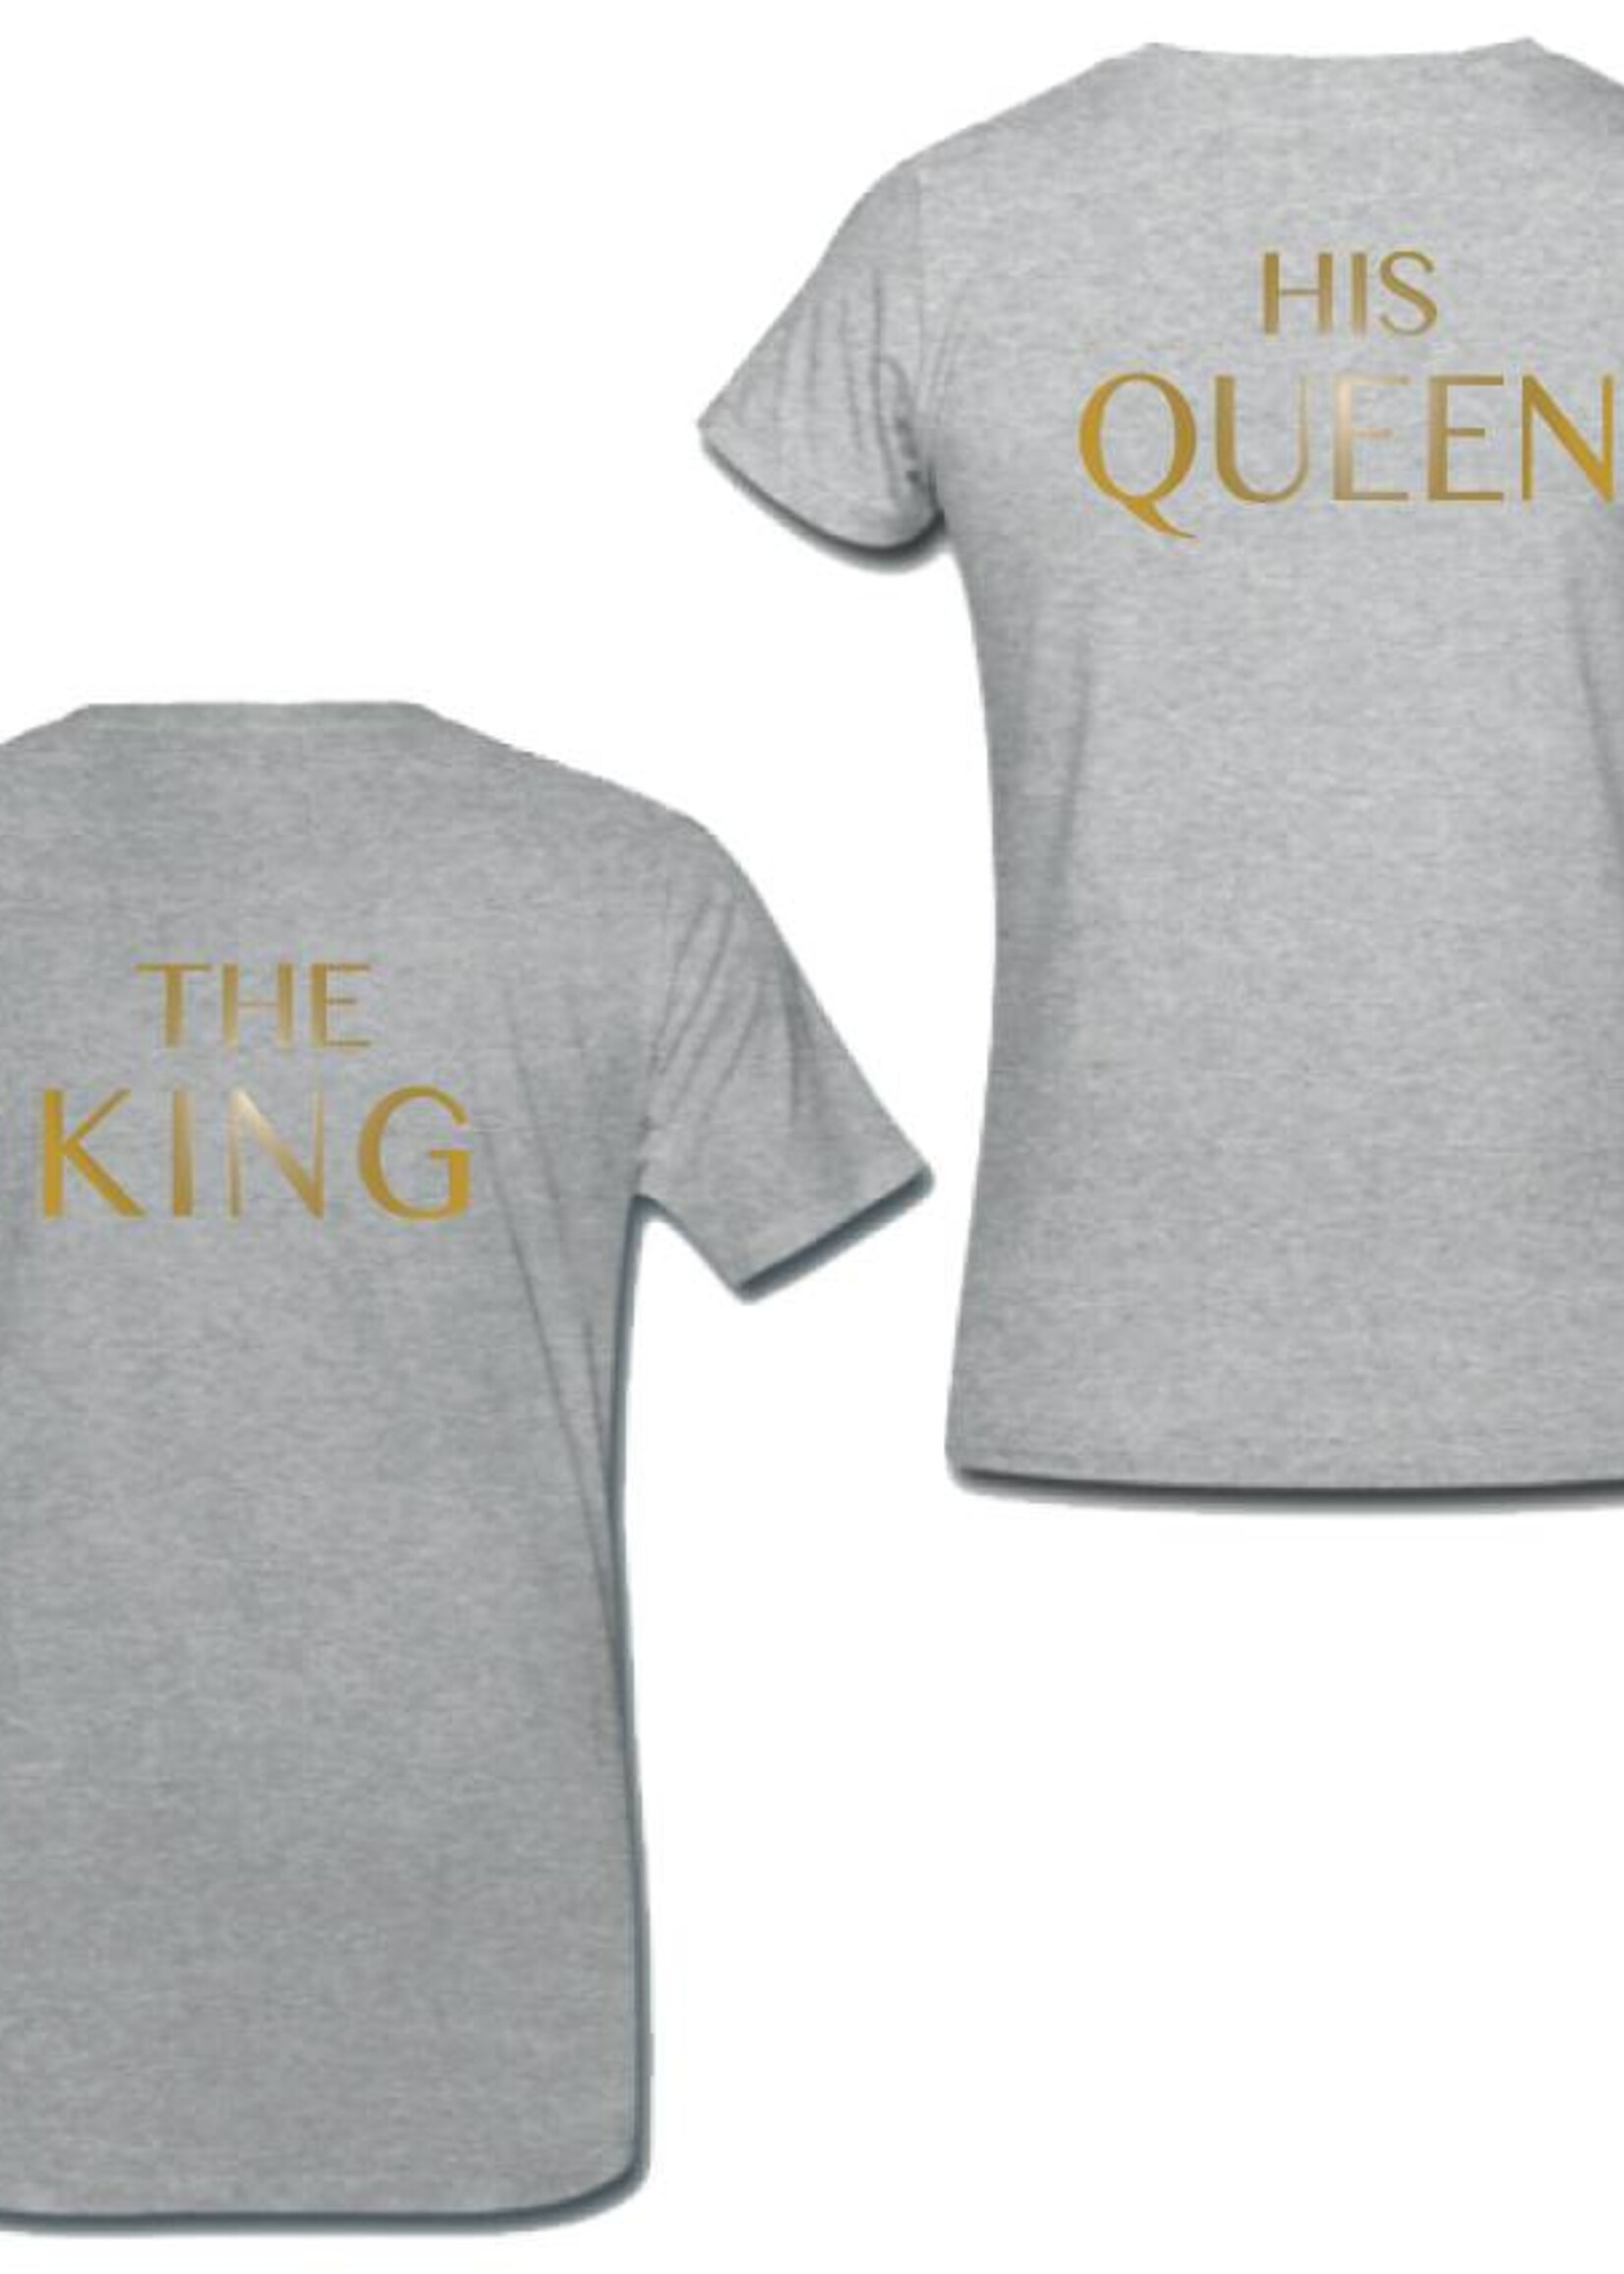 THE KING & HIS QUEEN COUPLE TEES GOLD EDITION